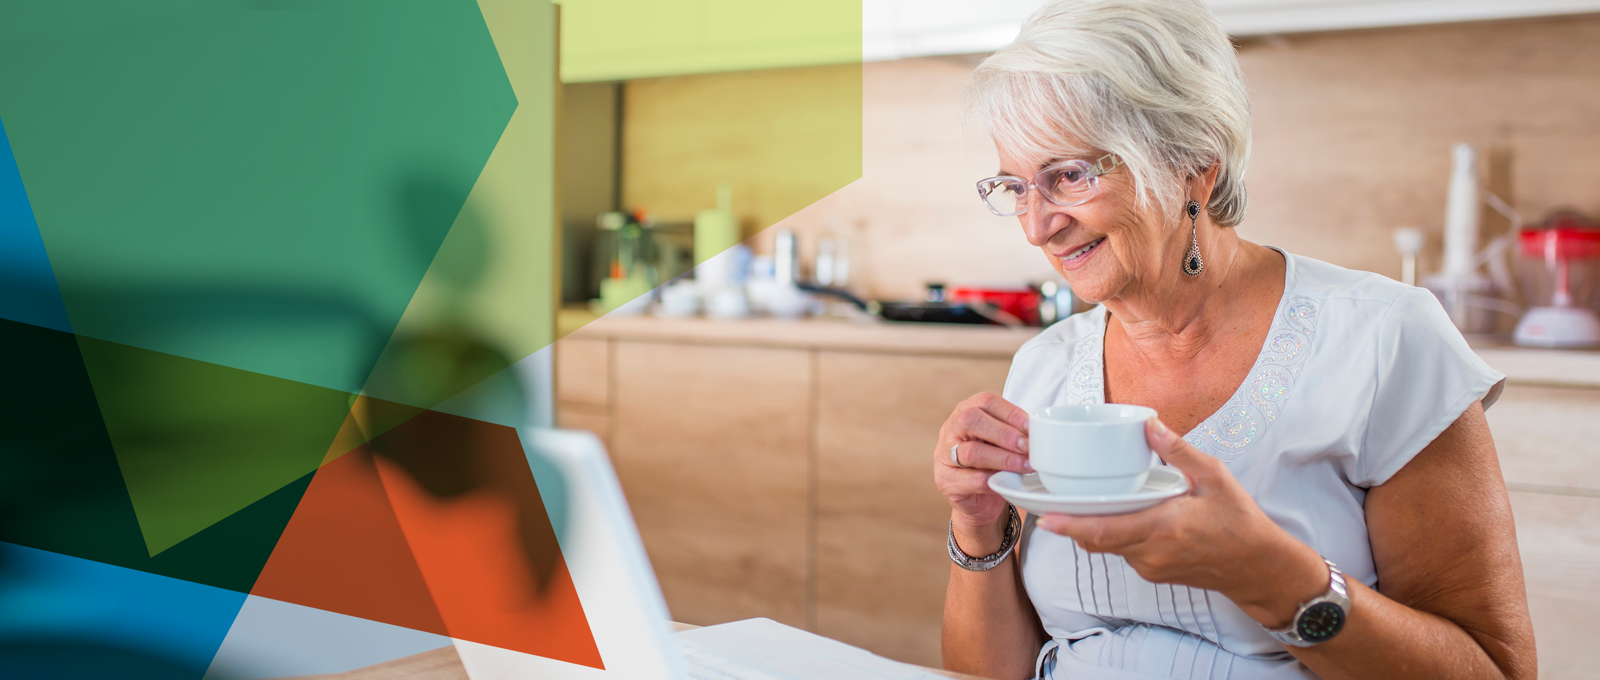 Photograph of an older woman holding a teacup in her kitchen and looking at a laptop